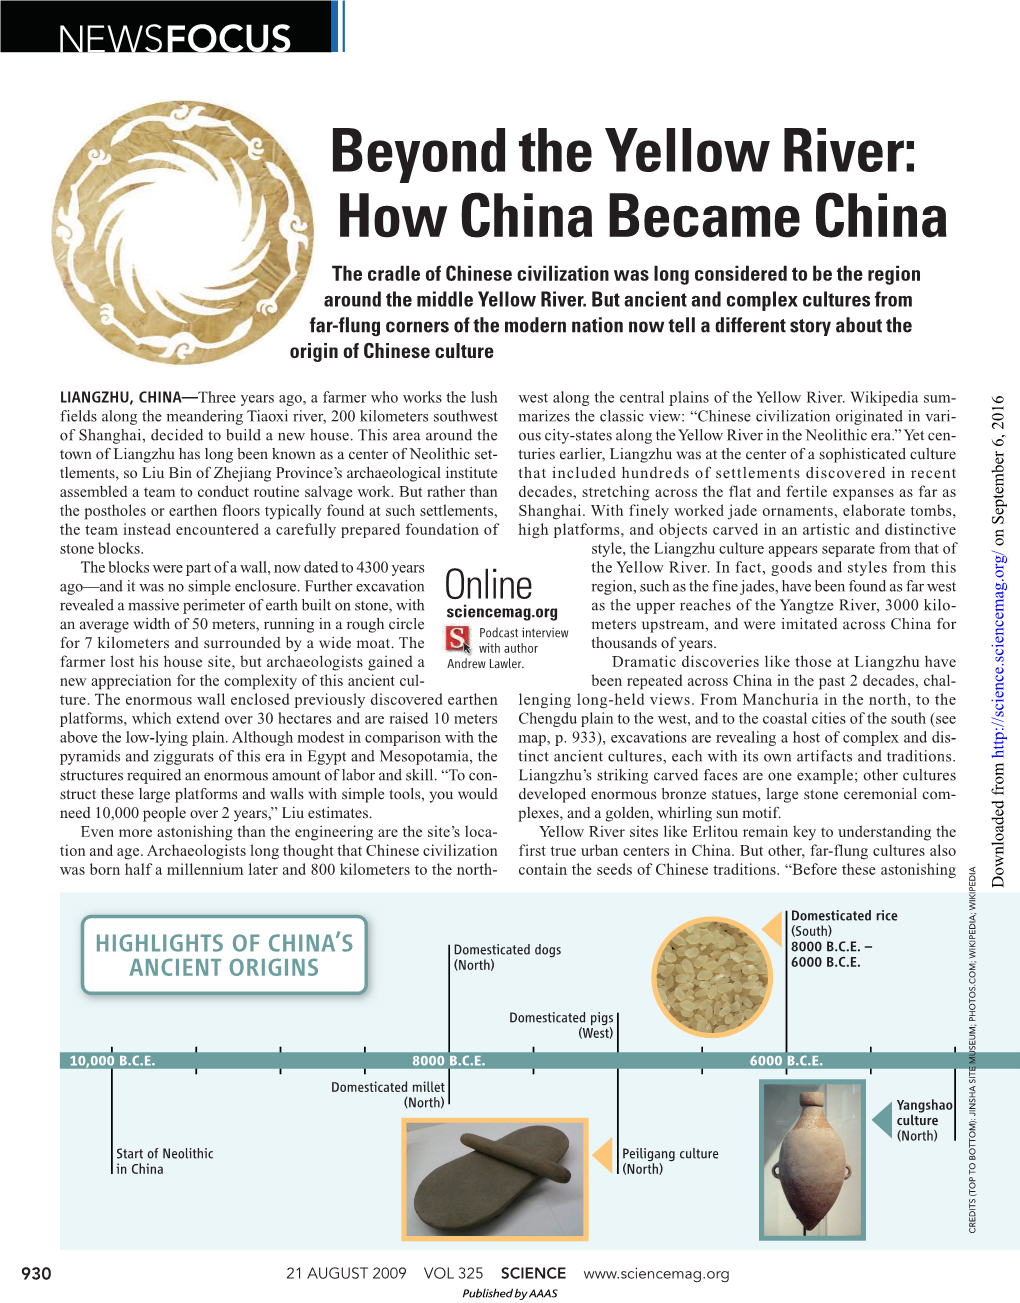 Becoming China Timeline